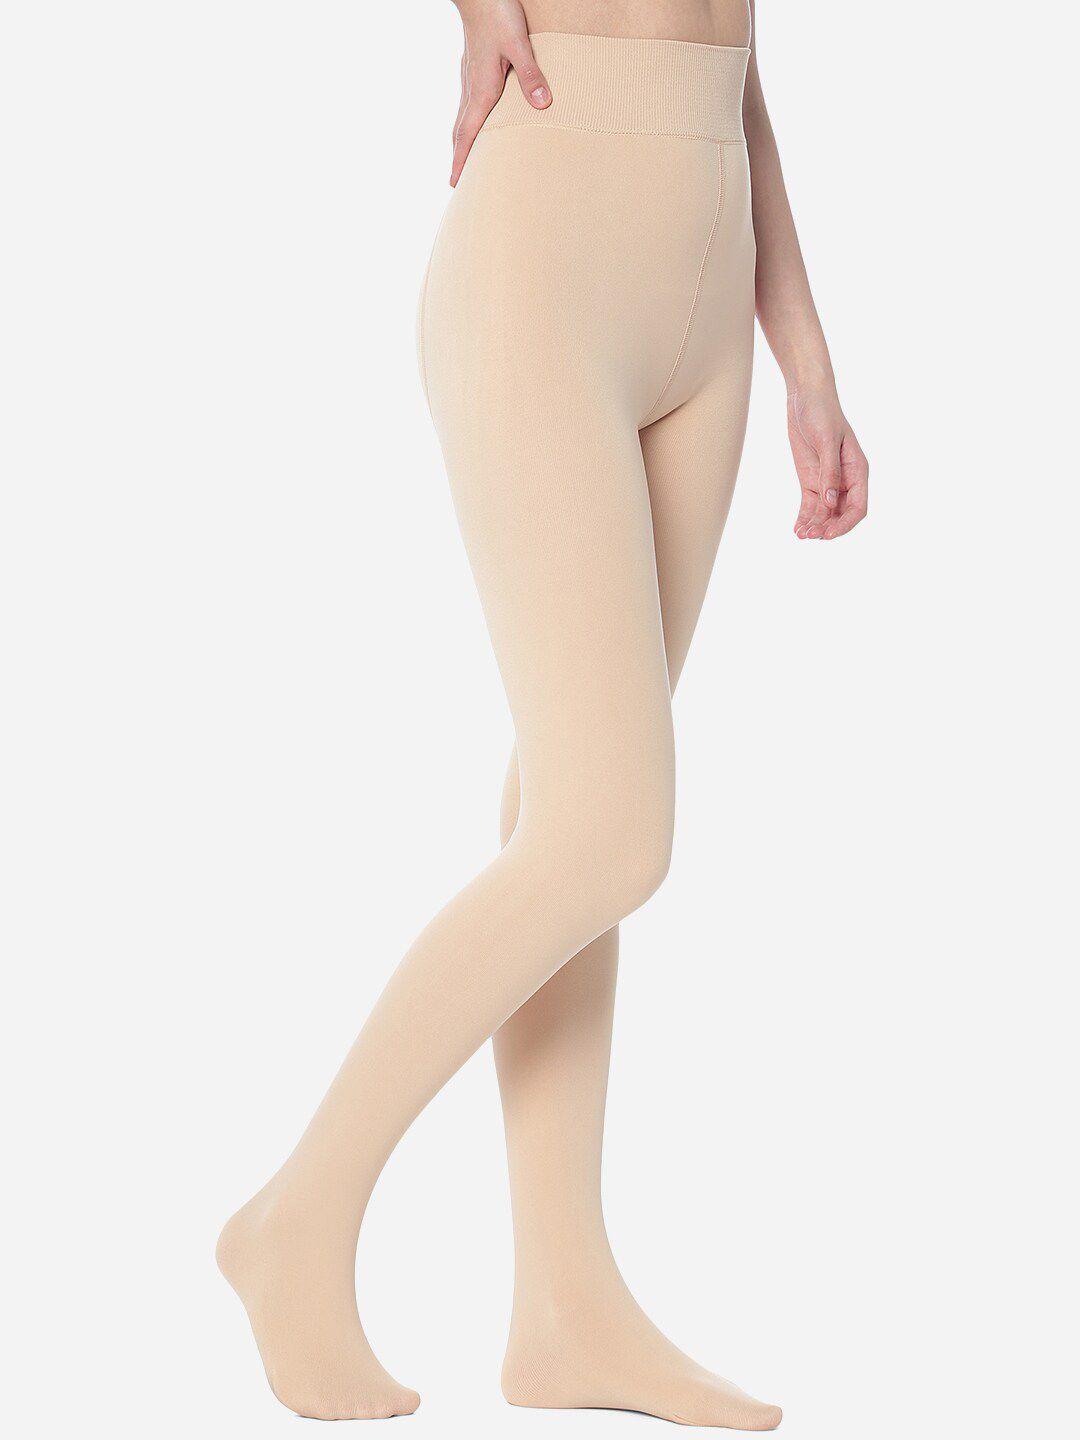 hsr women footed thermal bottom